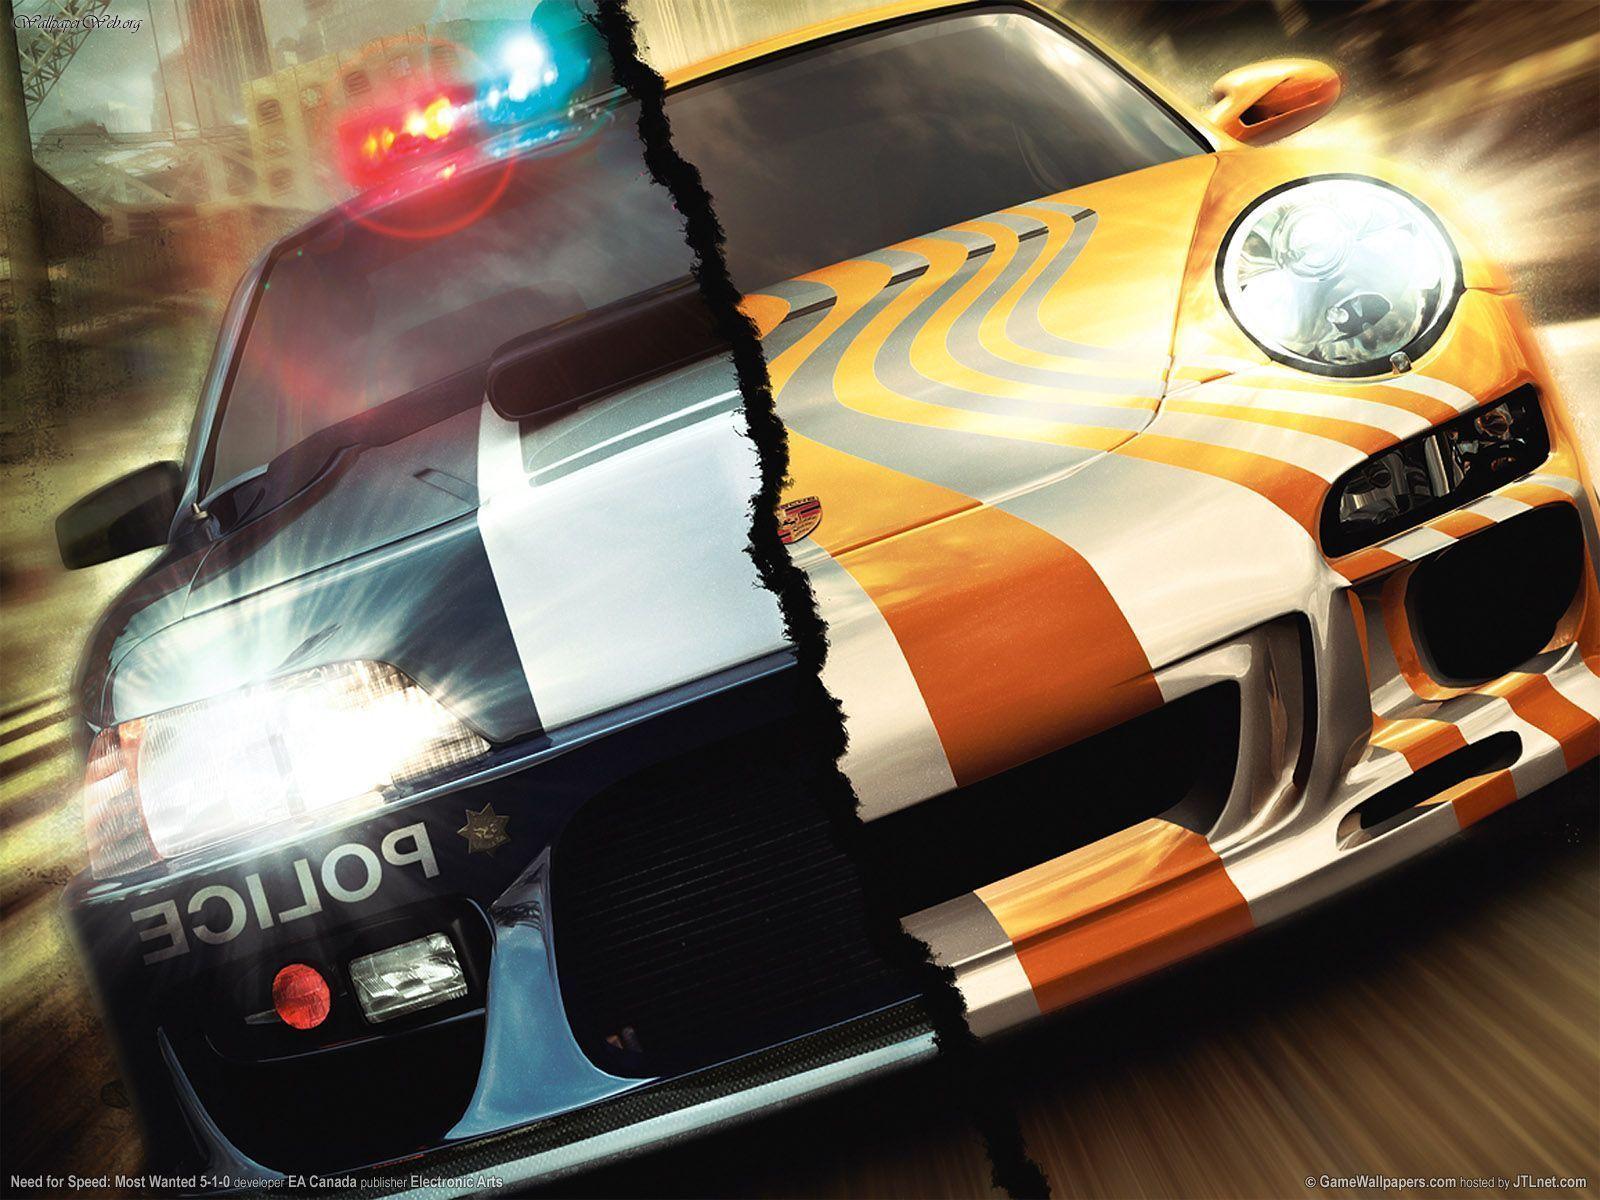 Desktop Nfs Most Wanted With Need For Speed Cars Wallpaper HD